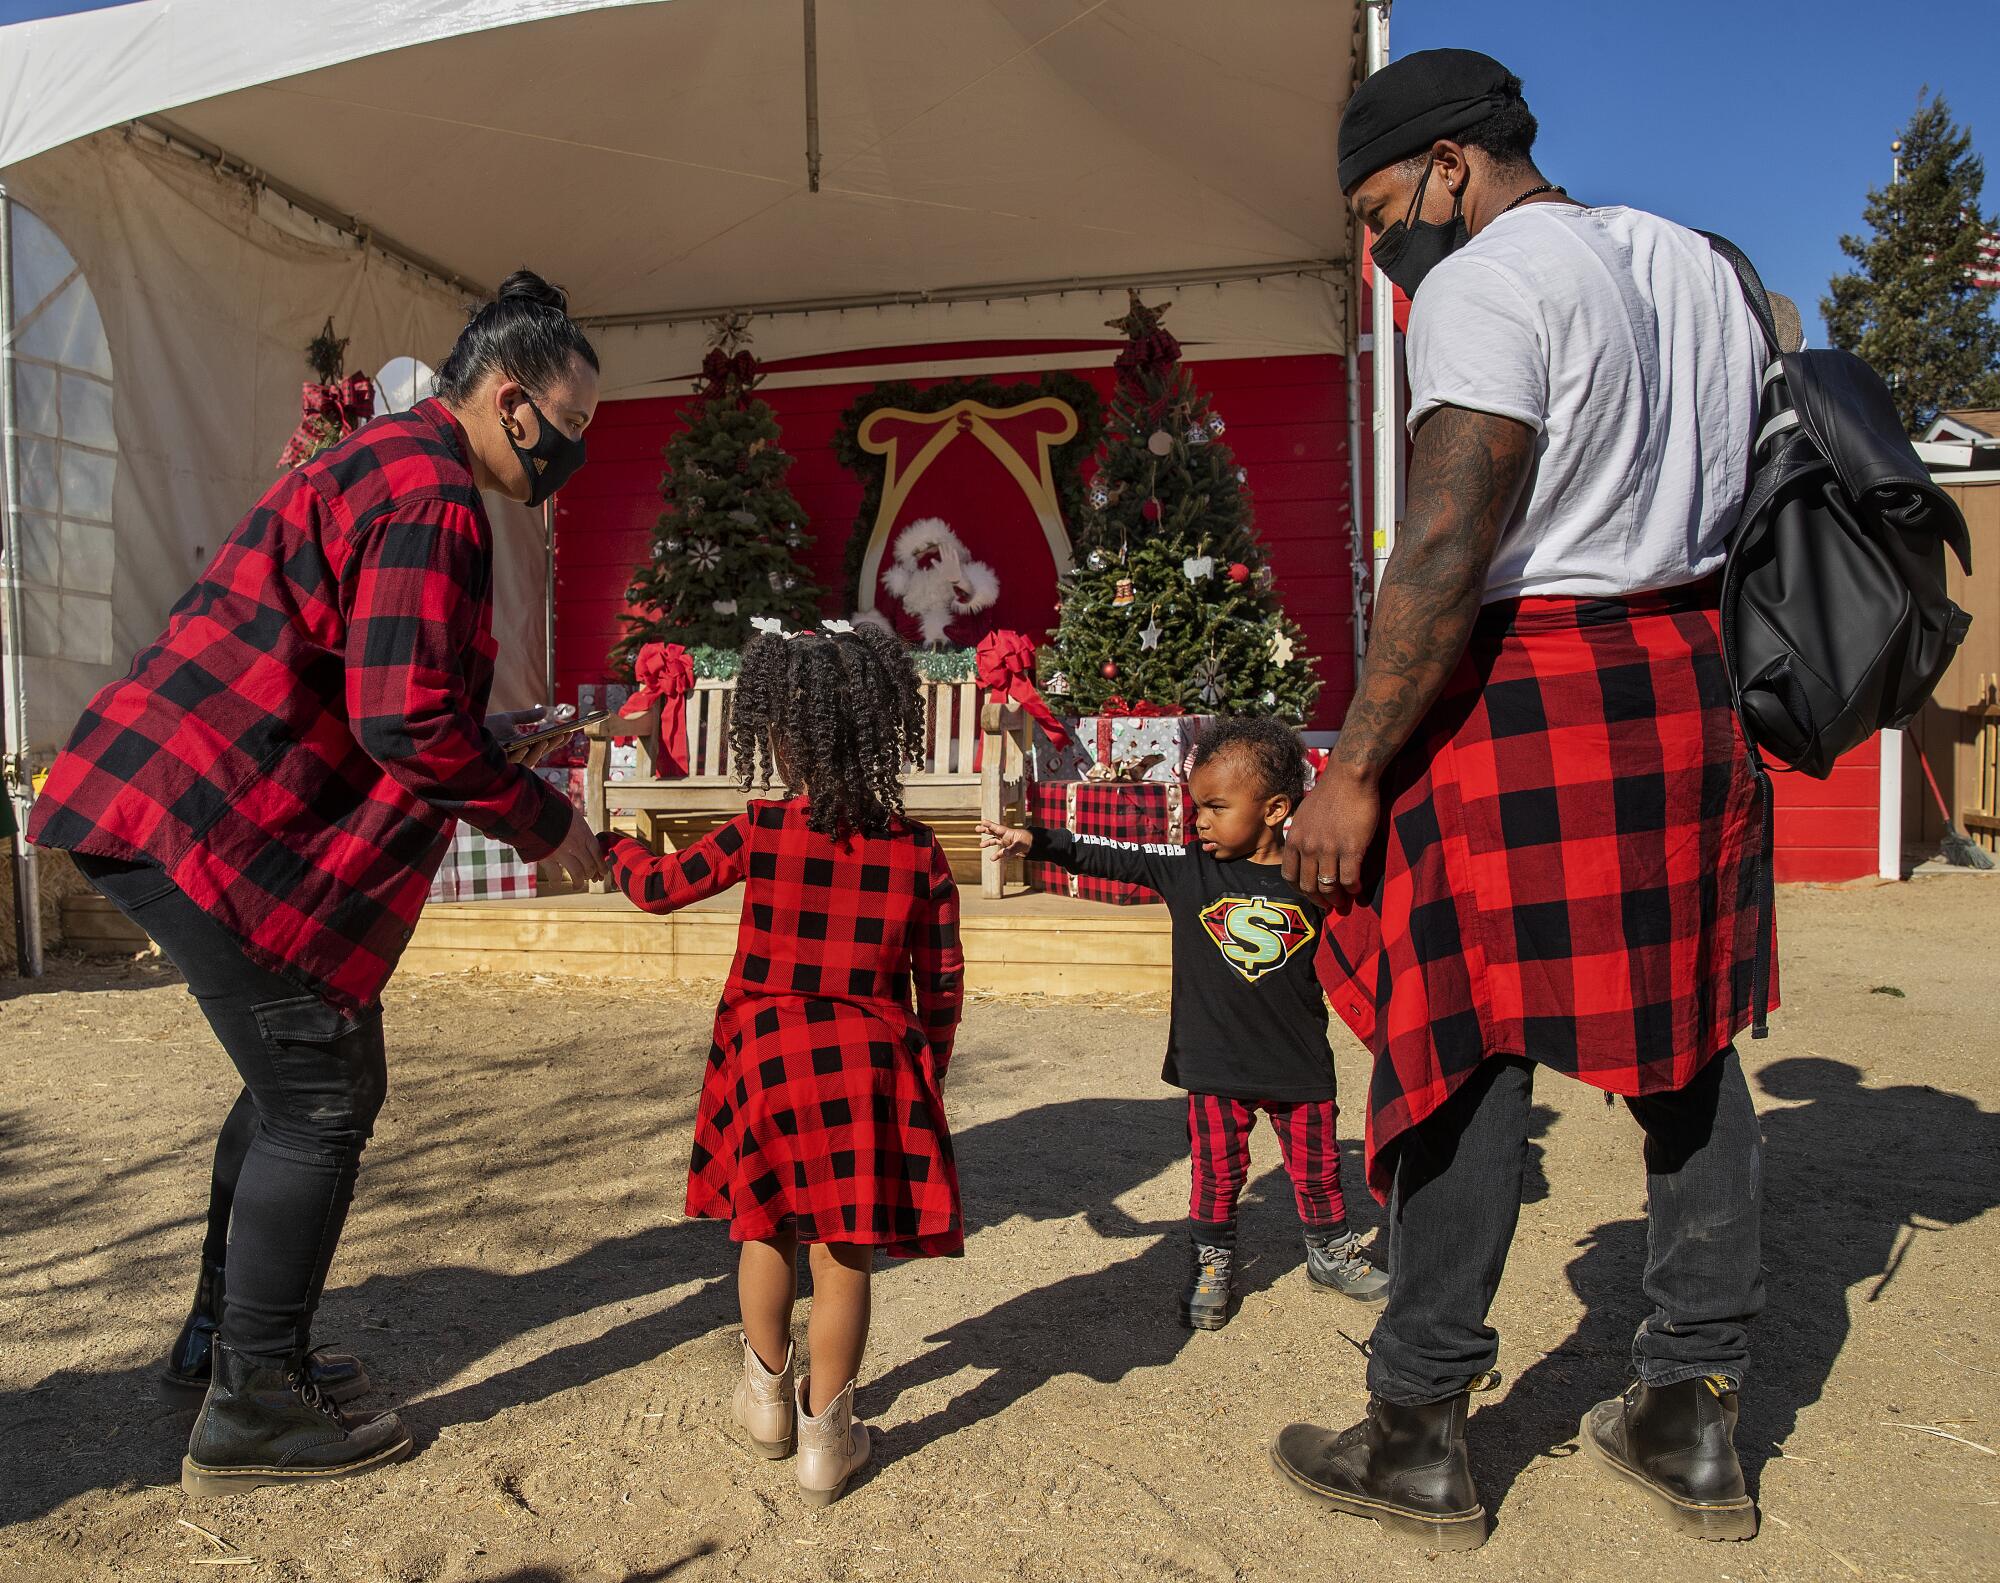 A family of four are dressed in matching red checkered clothing